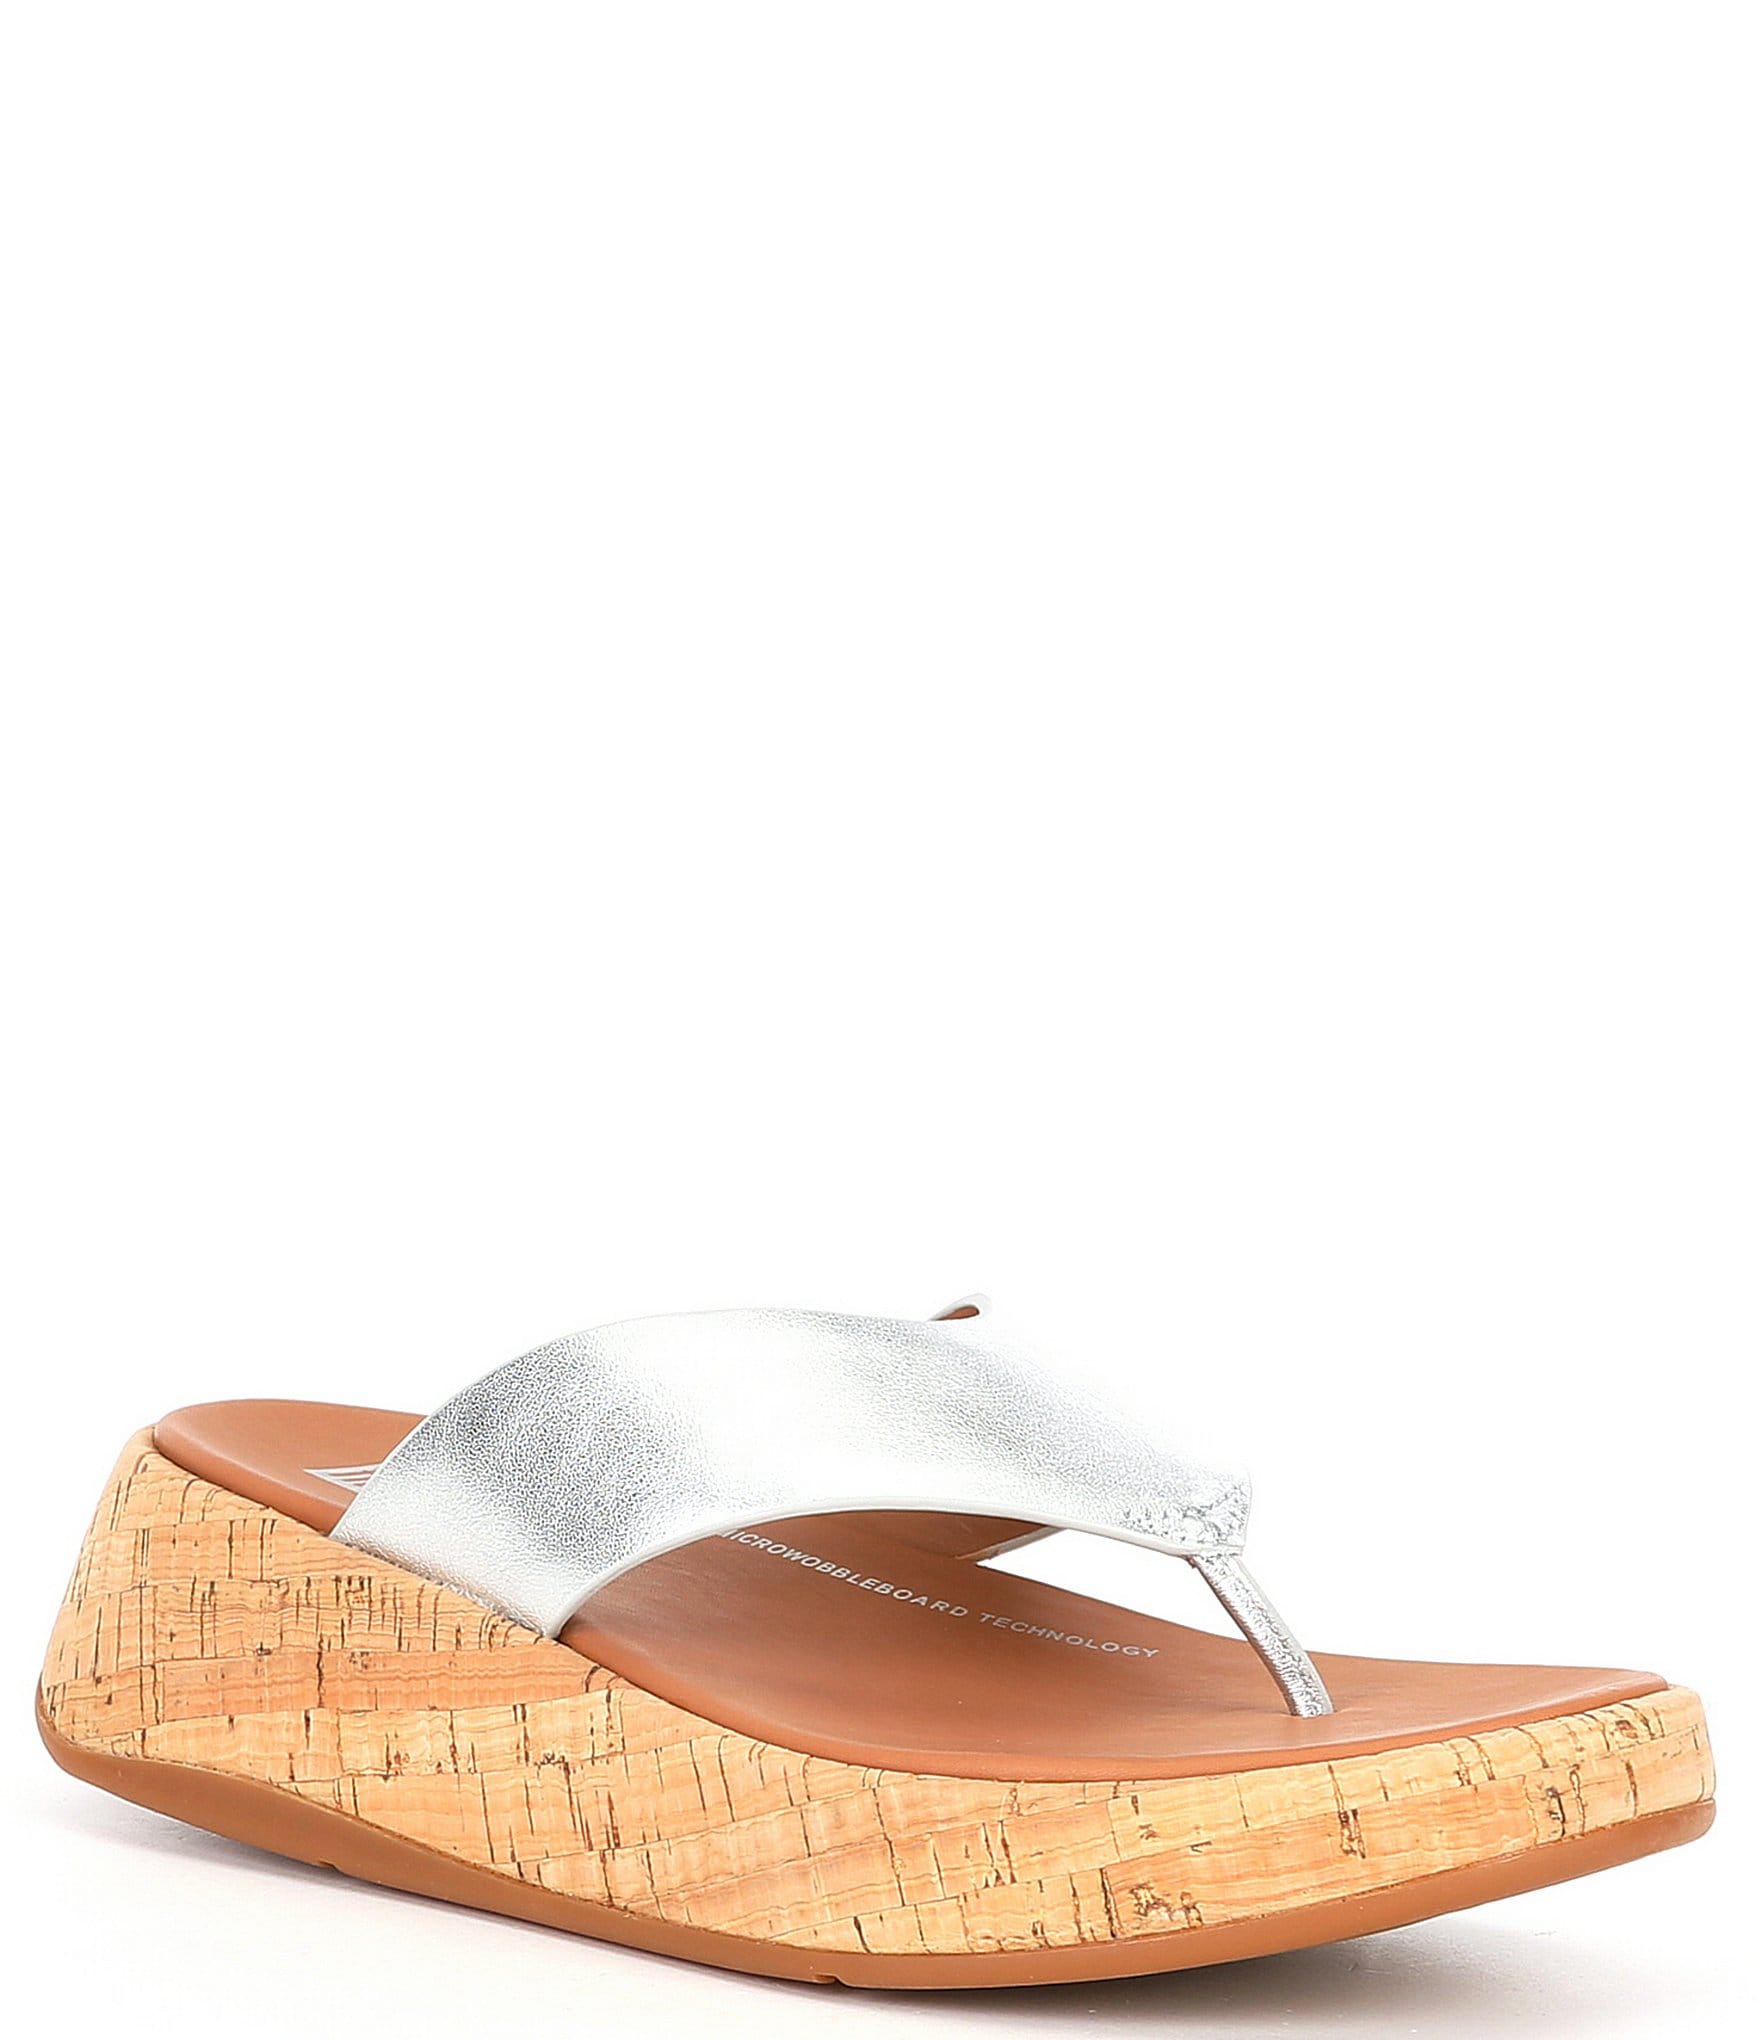 FitFlop F-mode Metallic Leather and Cork Thong Sandals | Dillard's